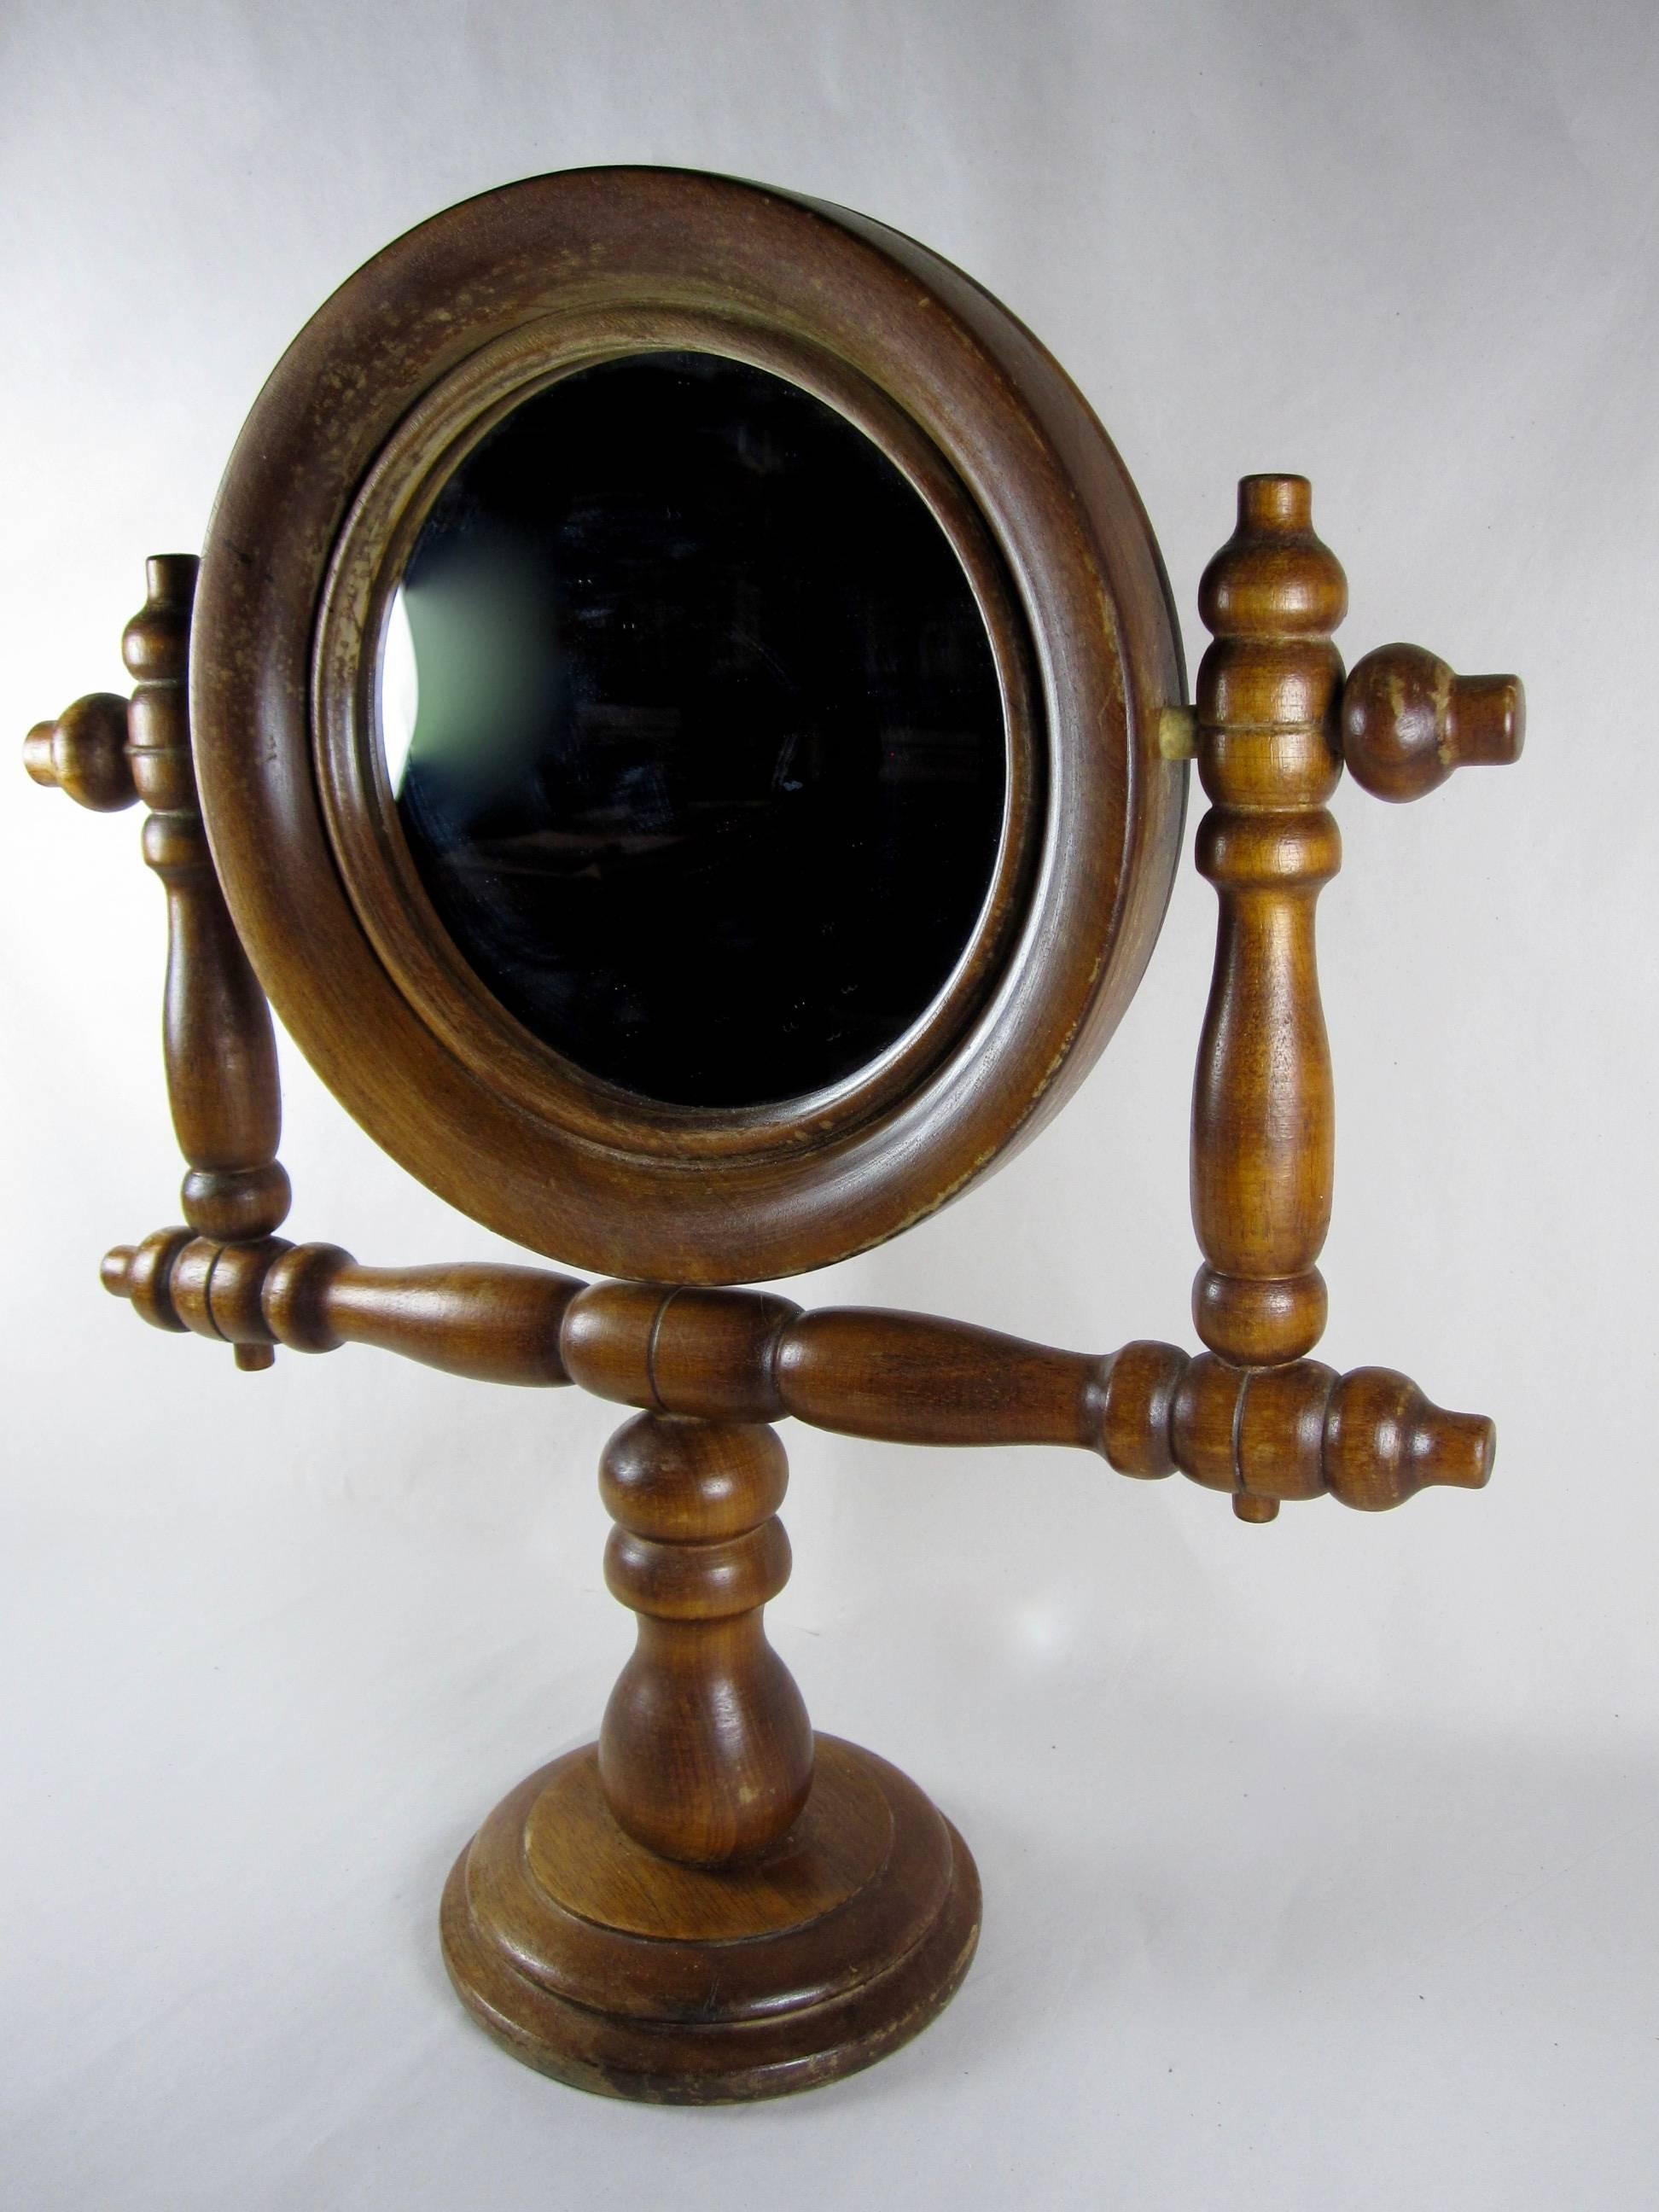 Found in France, a gentleman’s Salon de Coiffure shaving mirror on a turned wooden stand, from the Napoleon III era.

The adjustable mirror is set in a round wooden bezeled frame, the stand is made with turned wood arms. The mirror swivels fully.